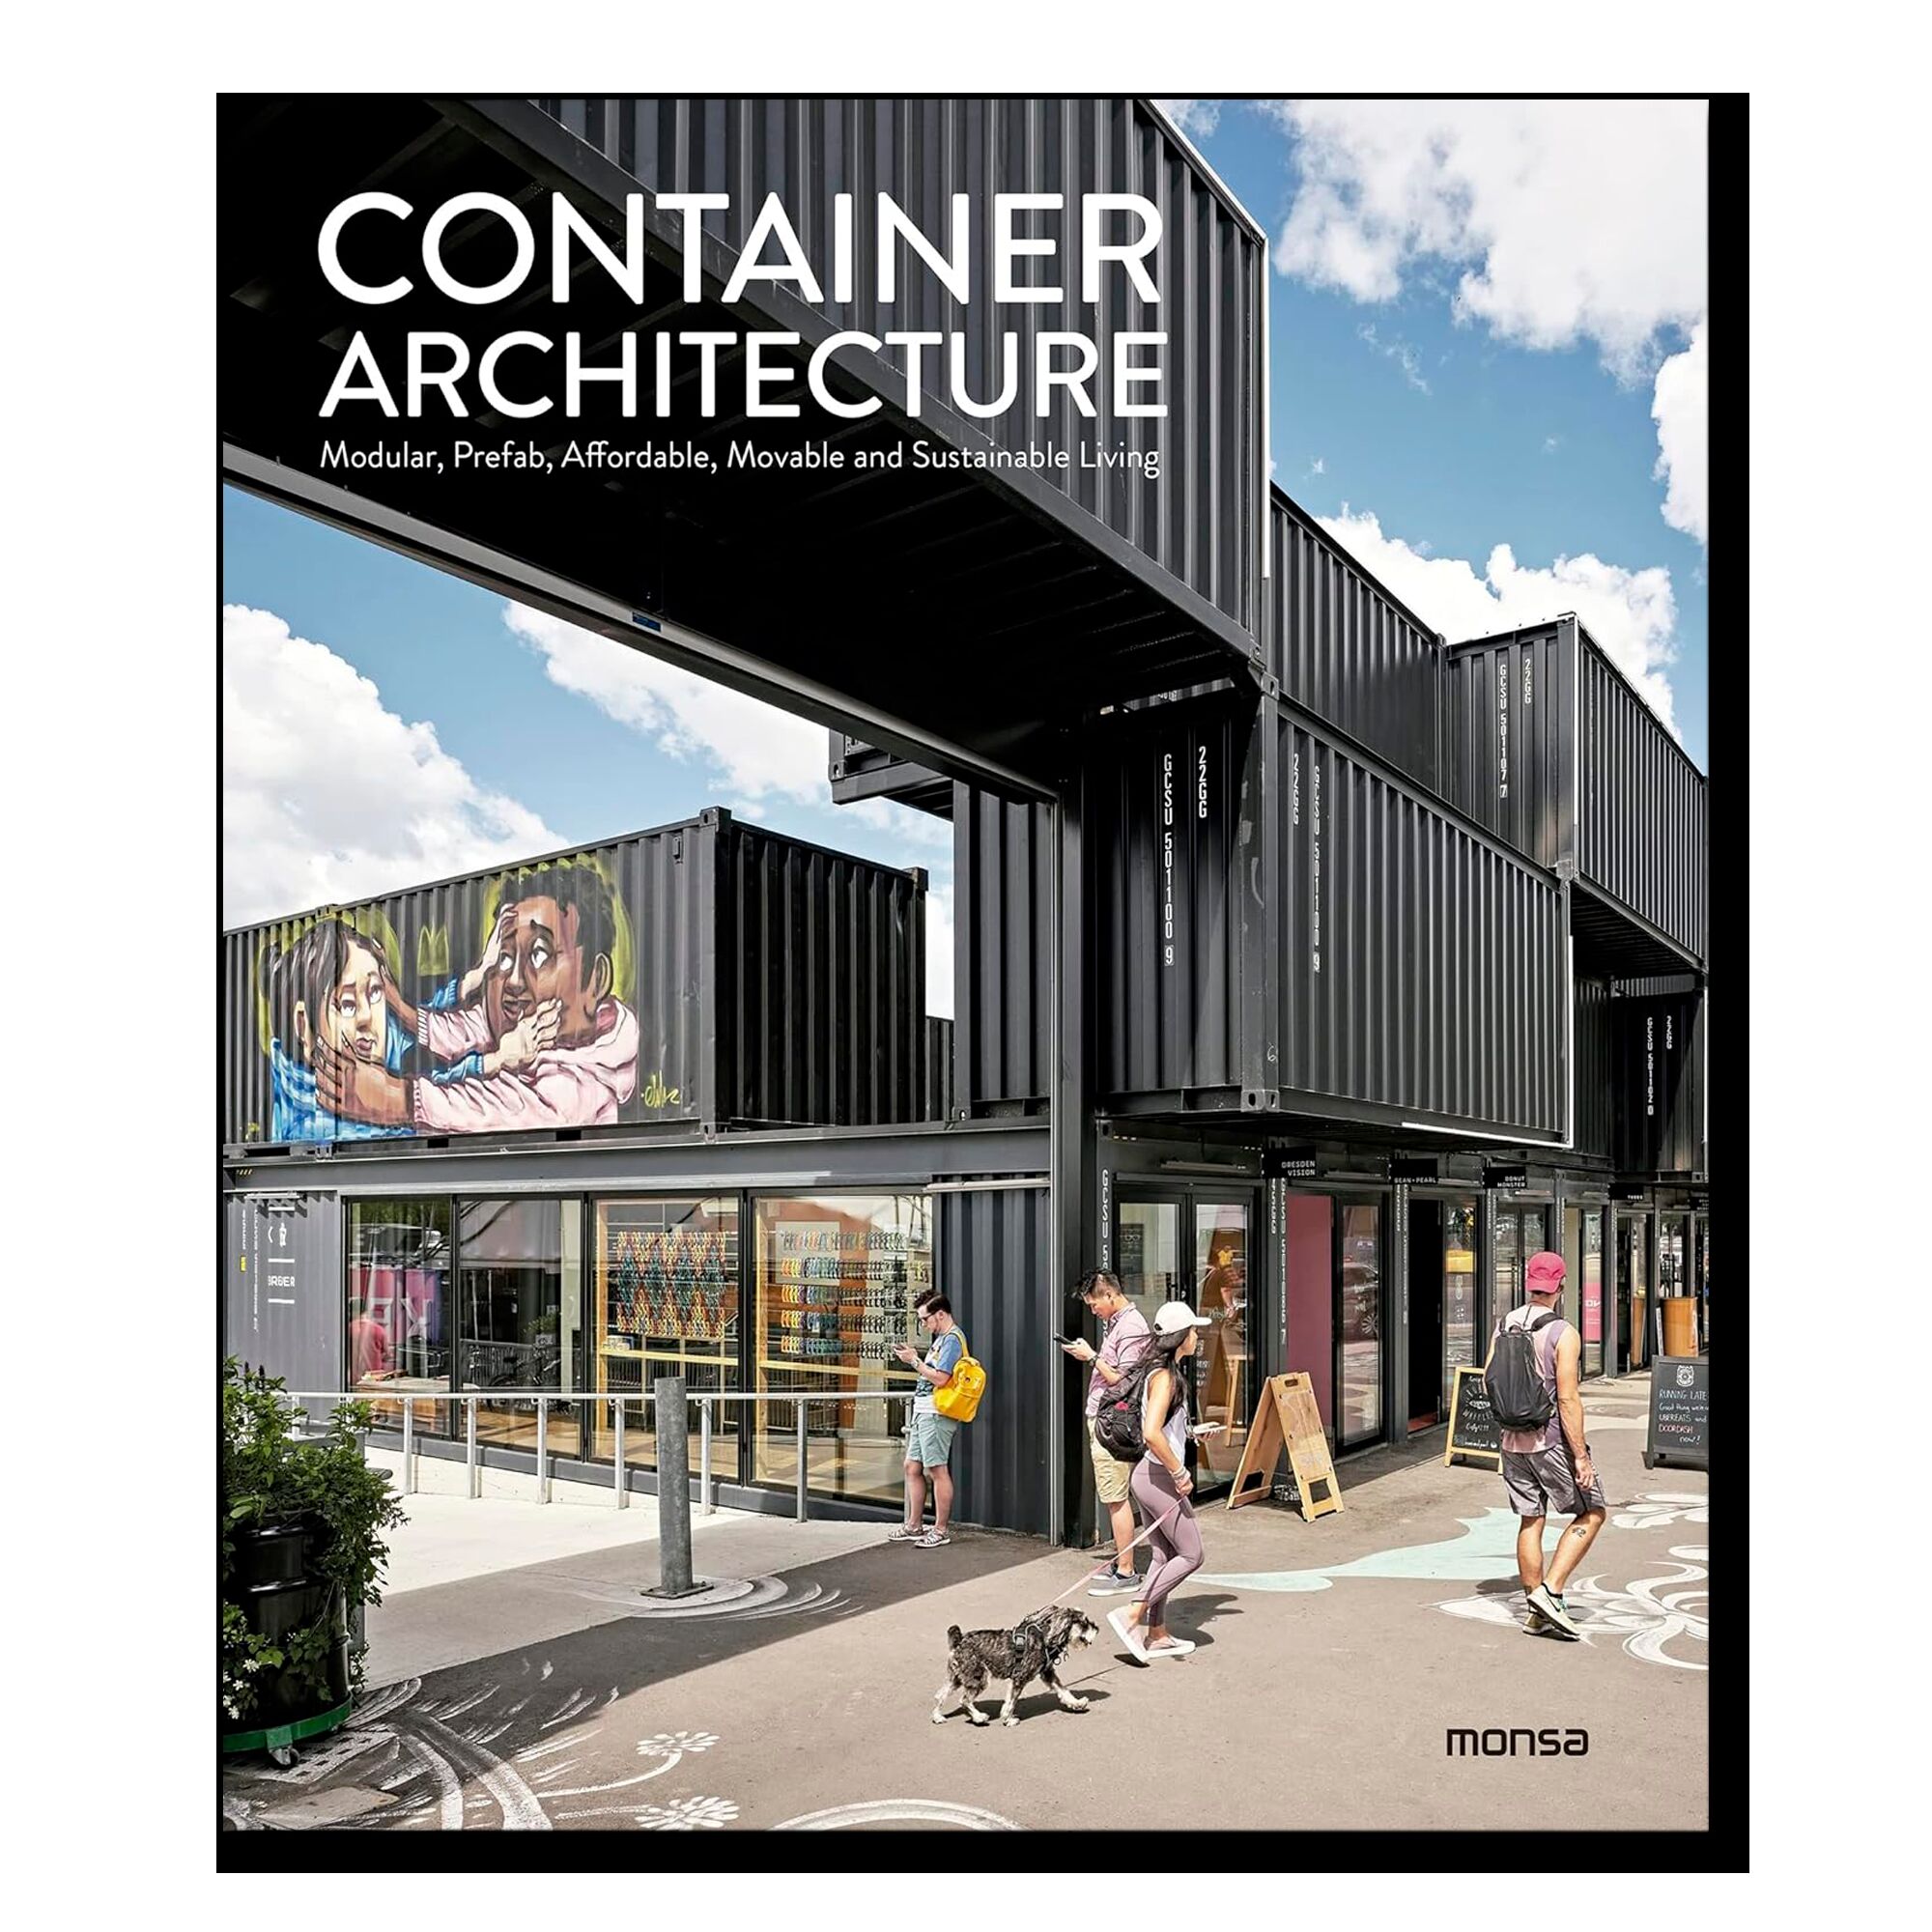 Container Architecture. Modular, Prefab, Affordable, Movable and Sustainable Living